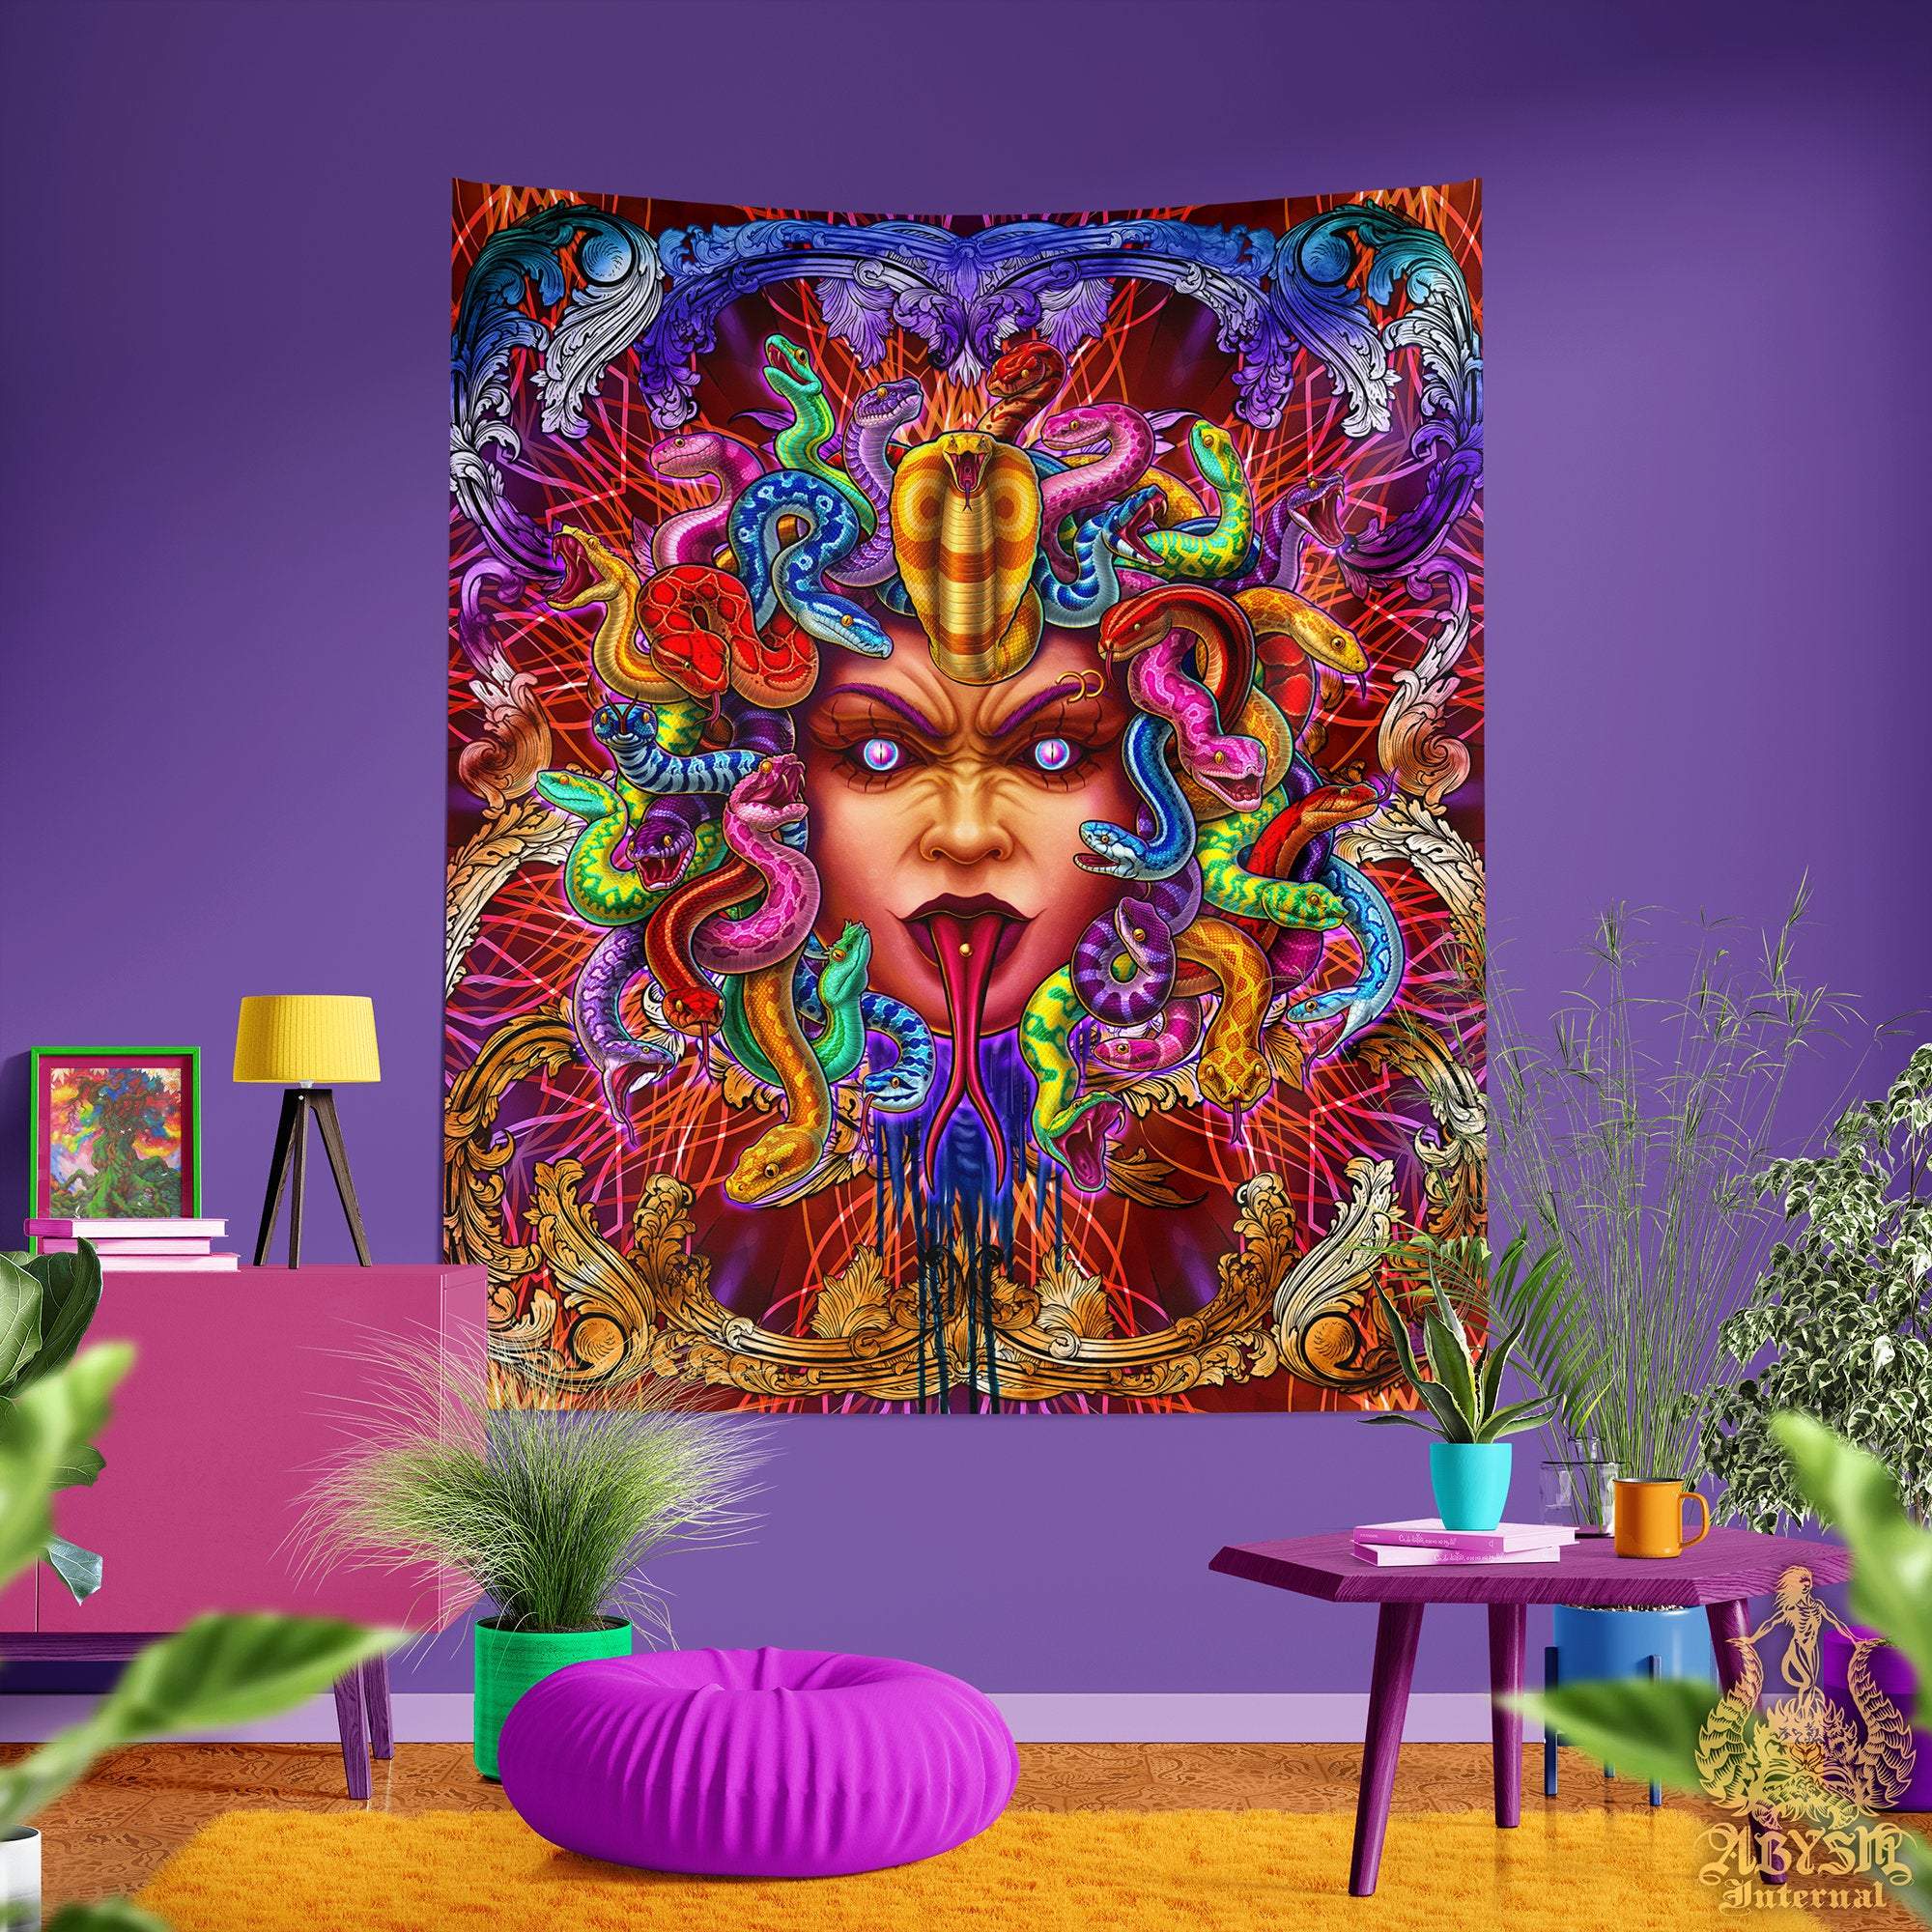 Psychedelic Tapestry, Psy Wall Hanging, Eclectic Home Decor, Vertical Art  Print - Rainbow Medusa & Snakes, 2 Faces